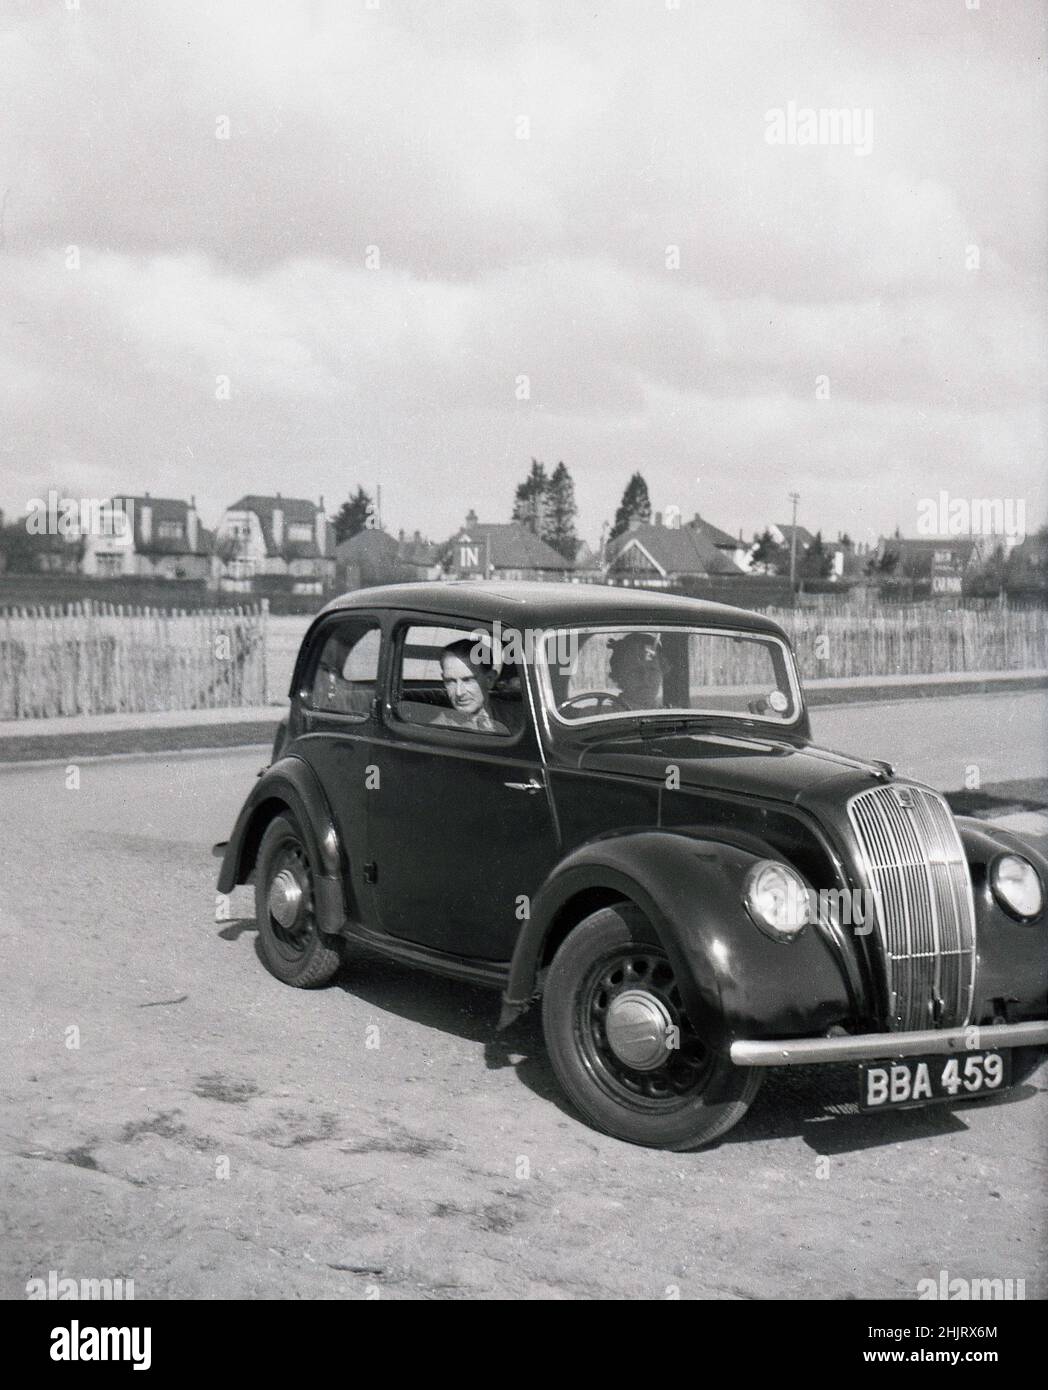 1950, historical, mature couple in car of the era, possibily a British made Ford, parked up at the coast, England, UK. Going out for a drive in a car was a popular pasttime in this era of little traffic and no parking restrictions. Stock Photo